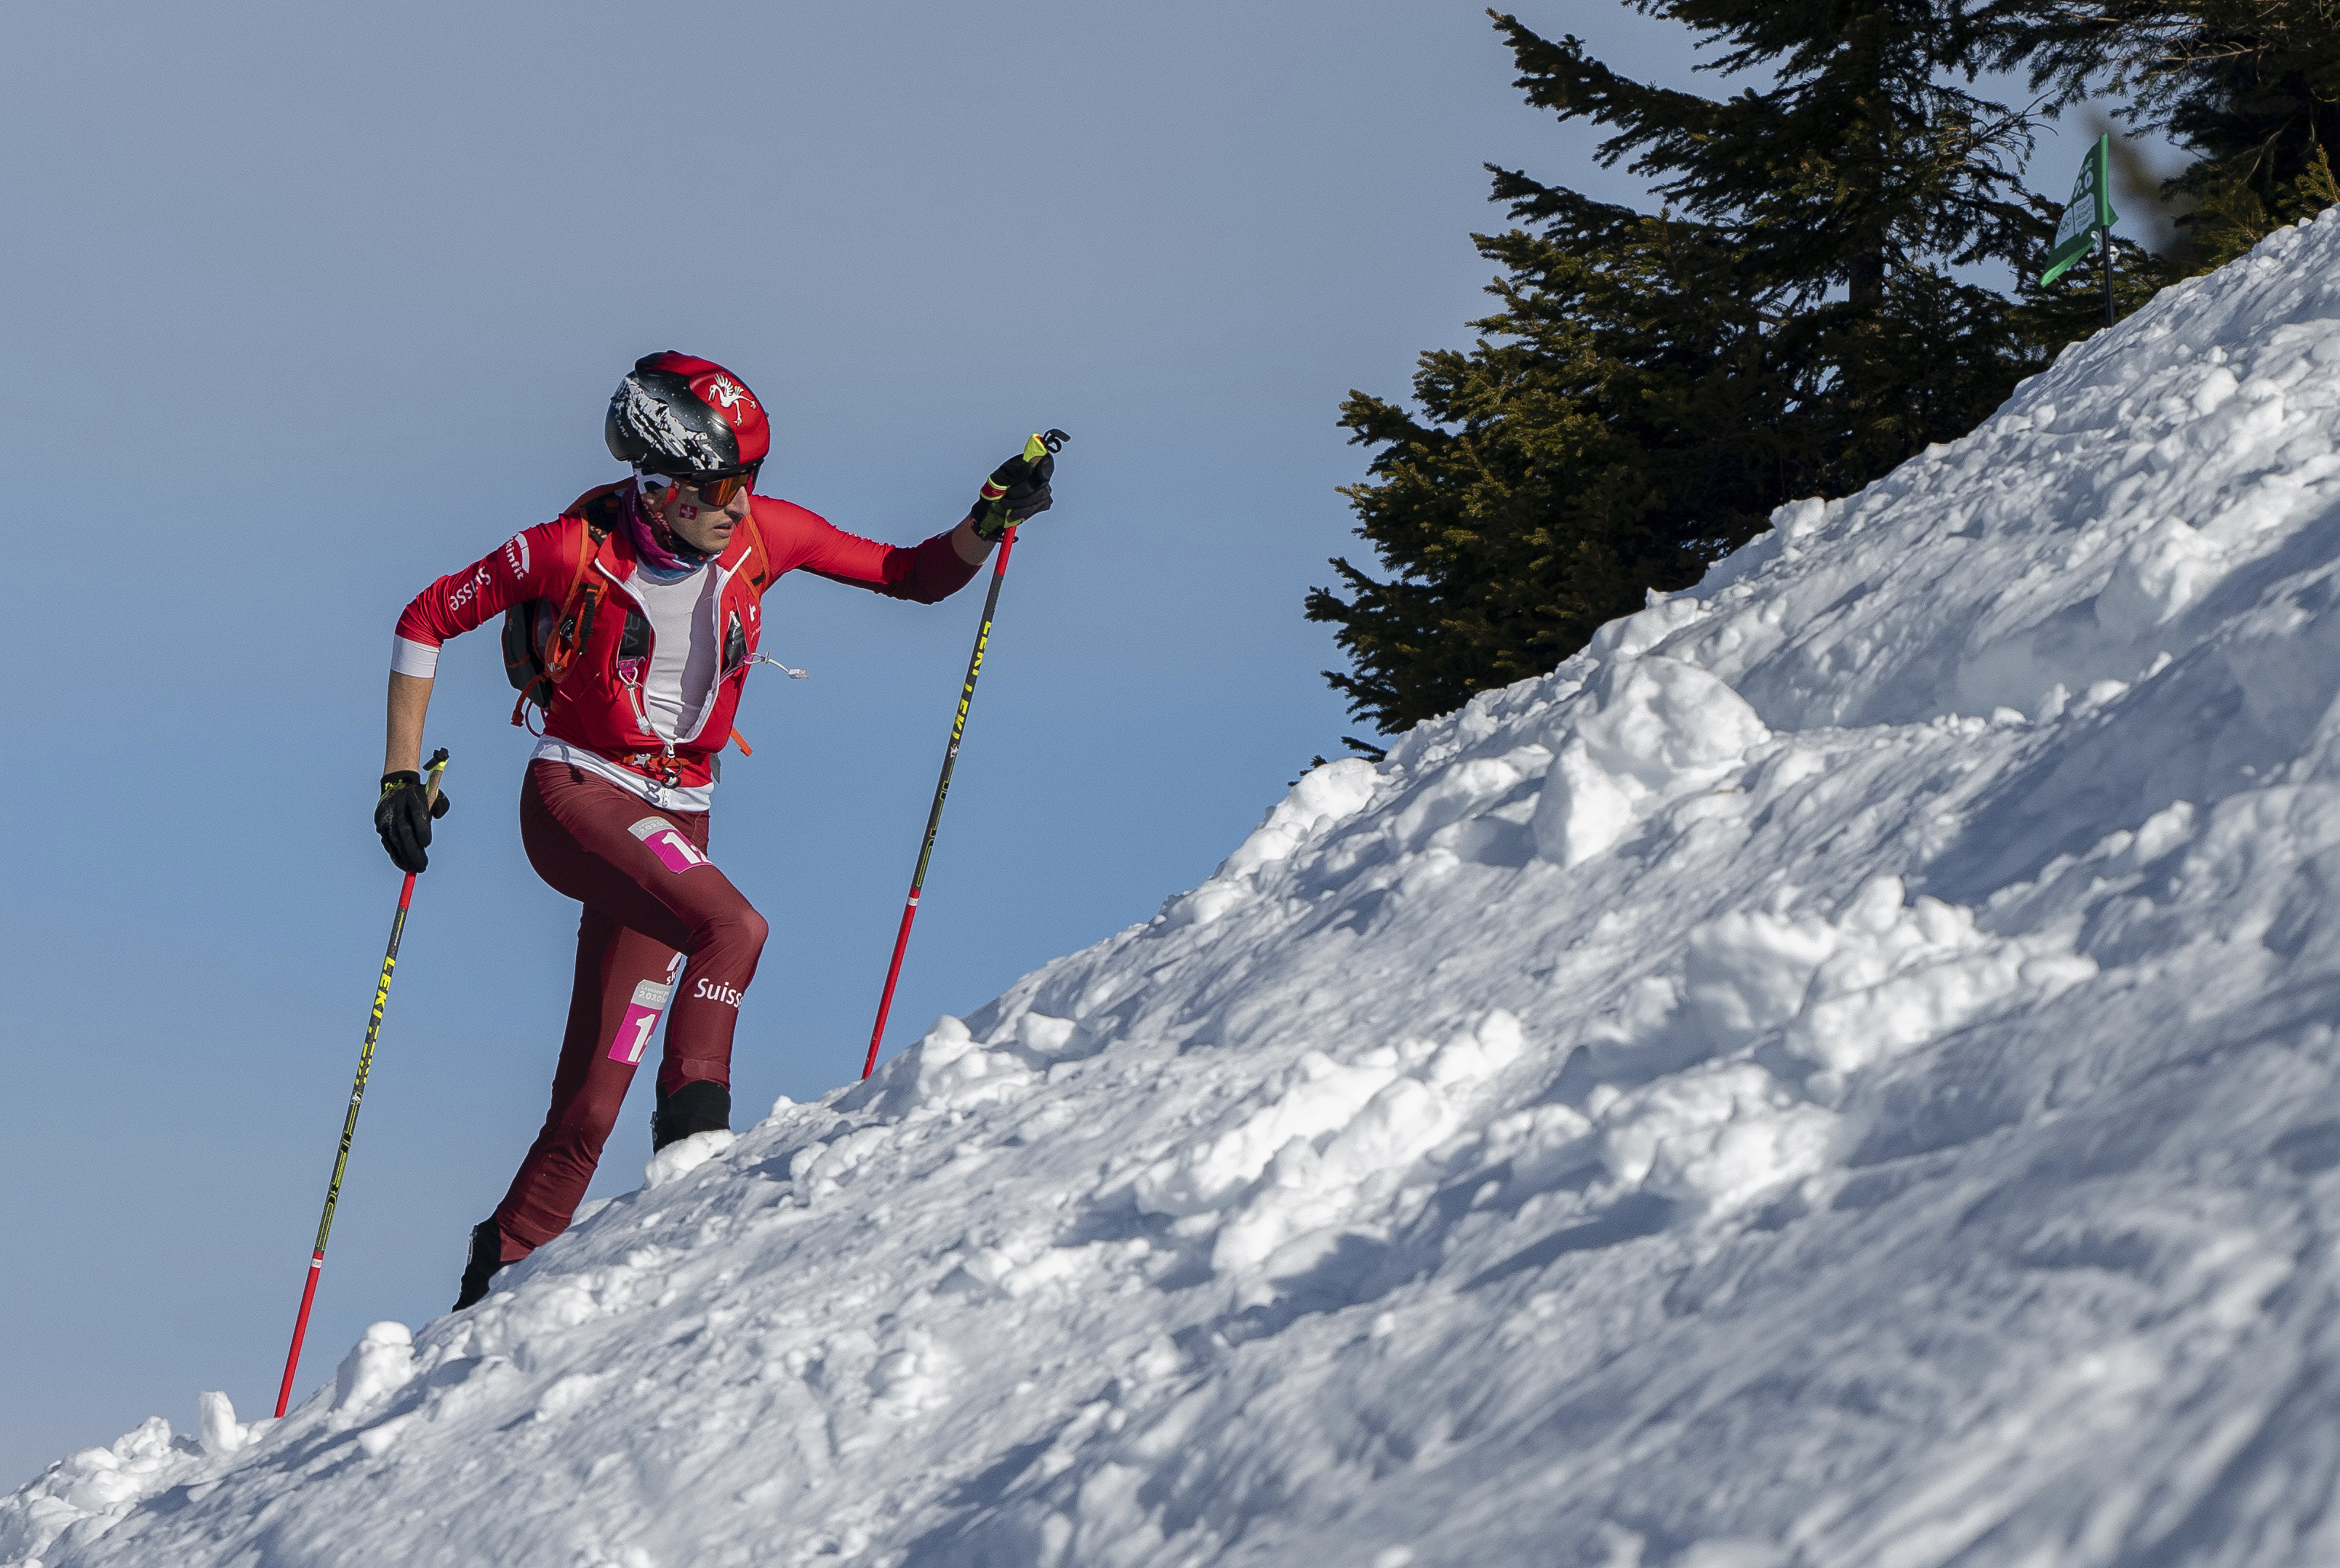 Ski Mountaineering Set to Join Olympics at 2026 Winter Games